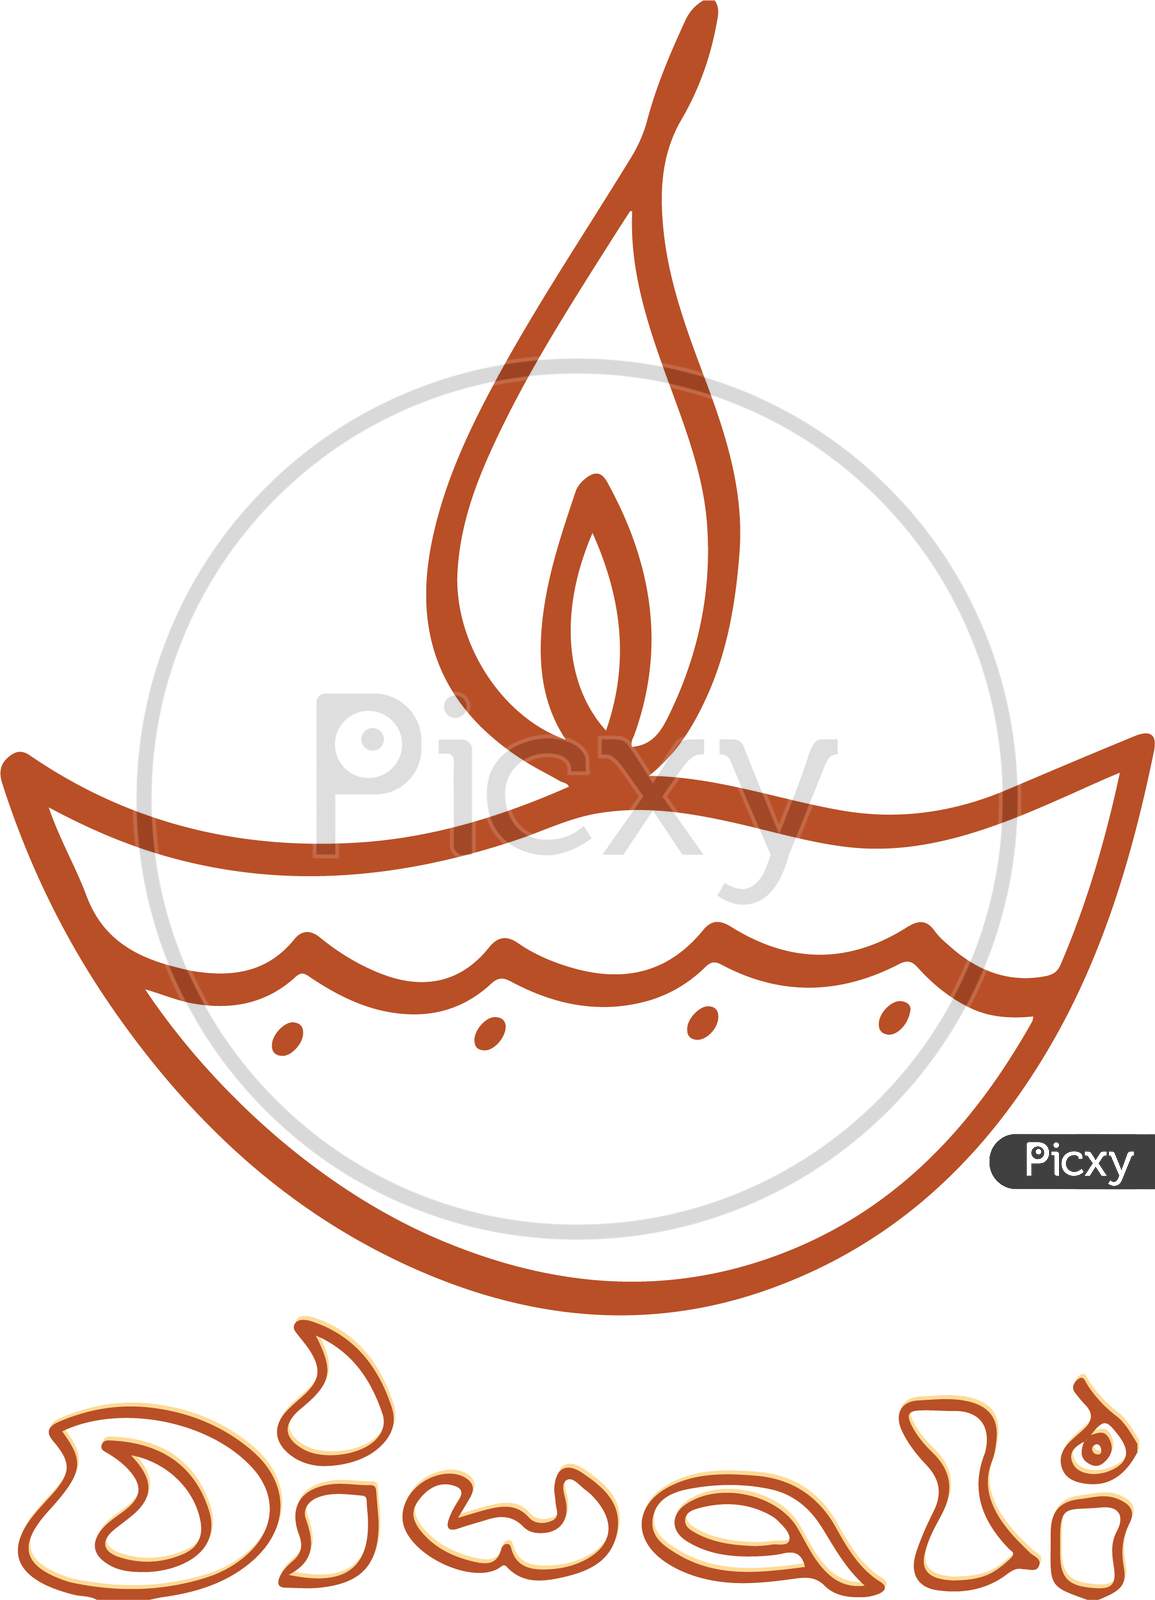 Diwali Diya Pen Ink Style Sketch Greeting Diwali Drawing Diya Drawing  Pen Drawing PNG and Vector with Transparent Background for Free Download